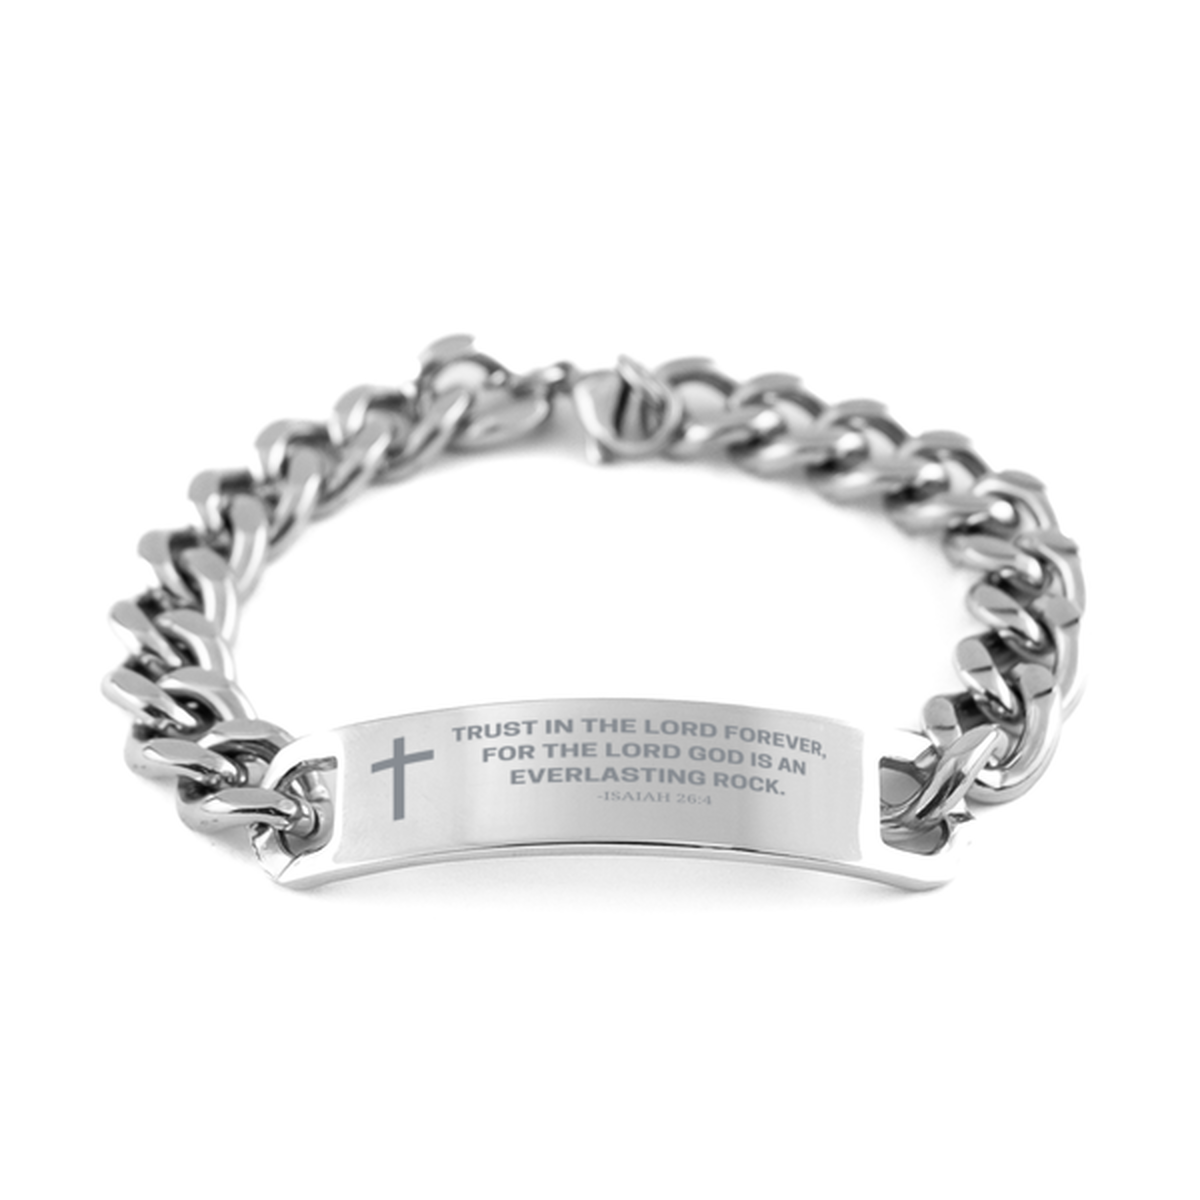 Baptism Gifts For Teenage Boys Girls, Christian Bible Verse Cuban Chain Bracelet, Trust in the Lord forever, Catholic Confirmation Gifts for Son, Godson, Grandson, Nephew